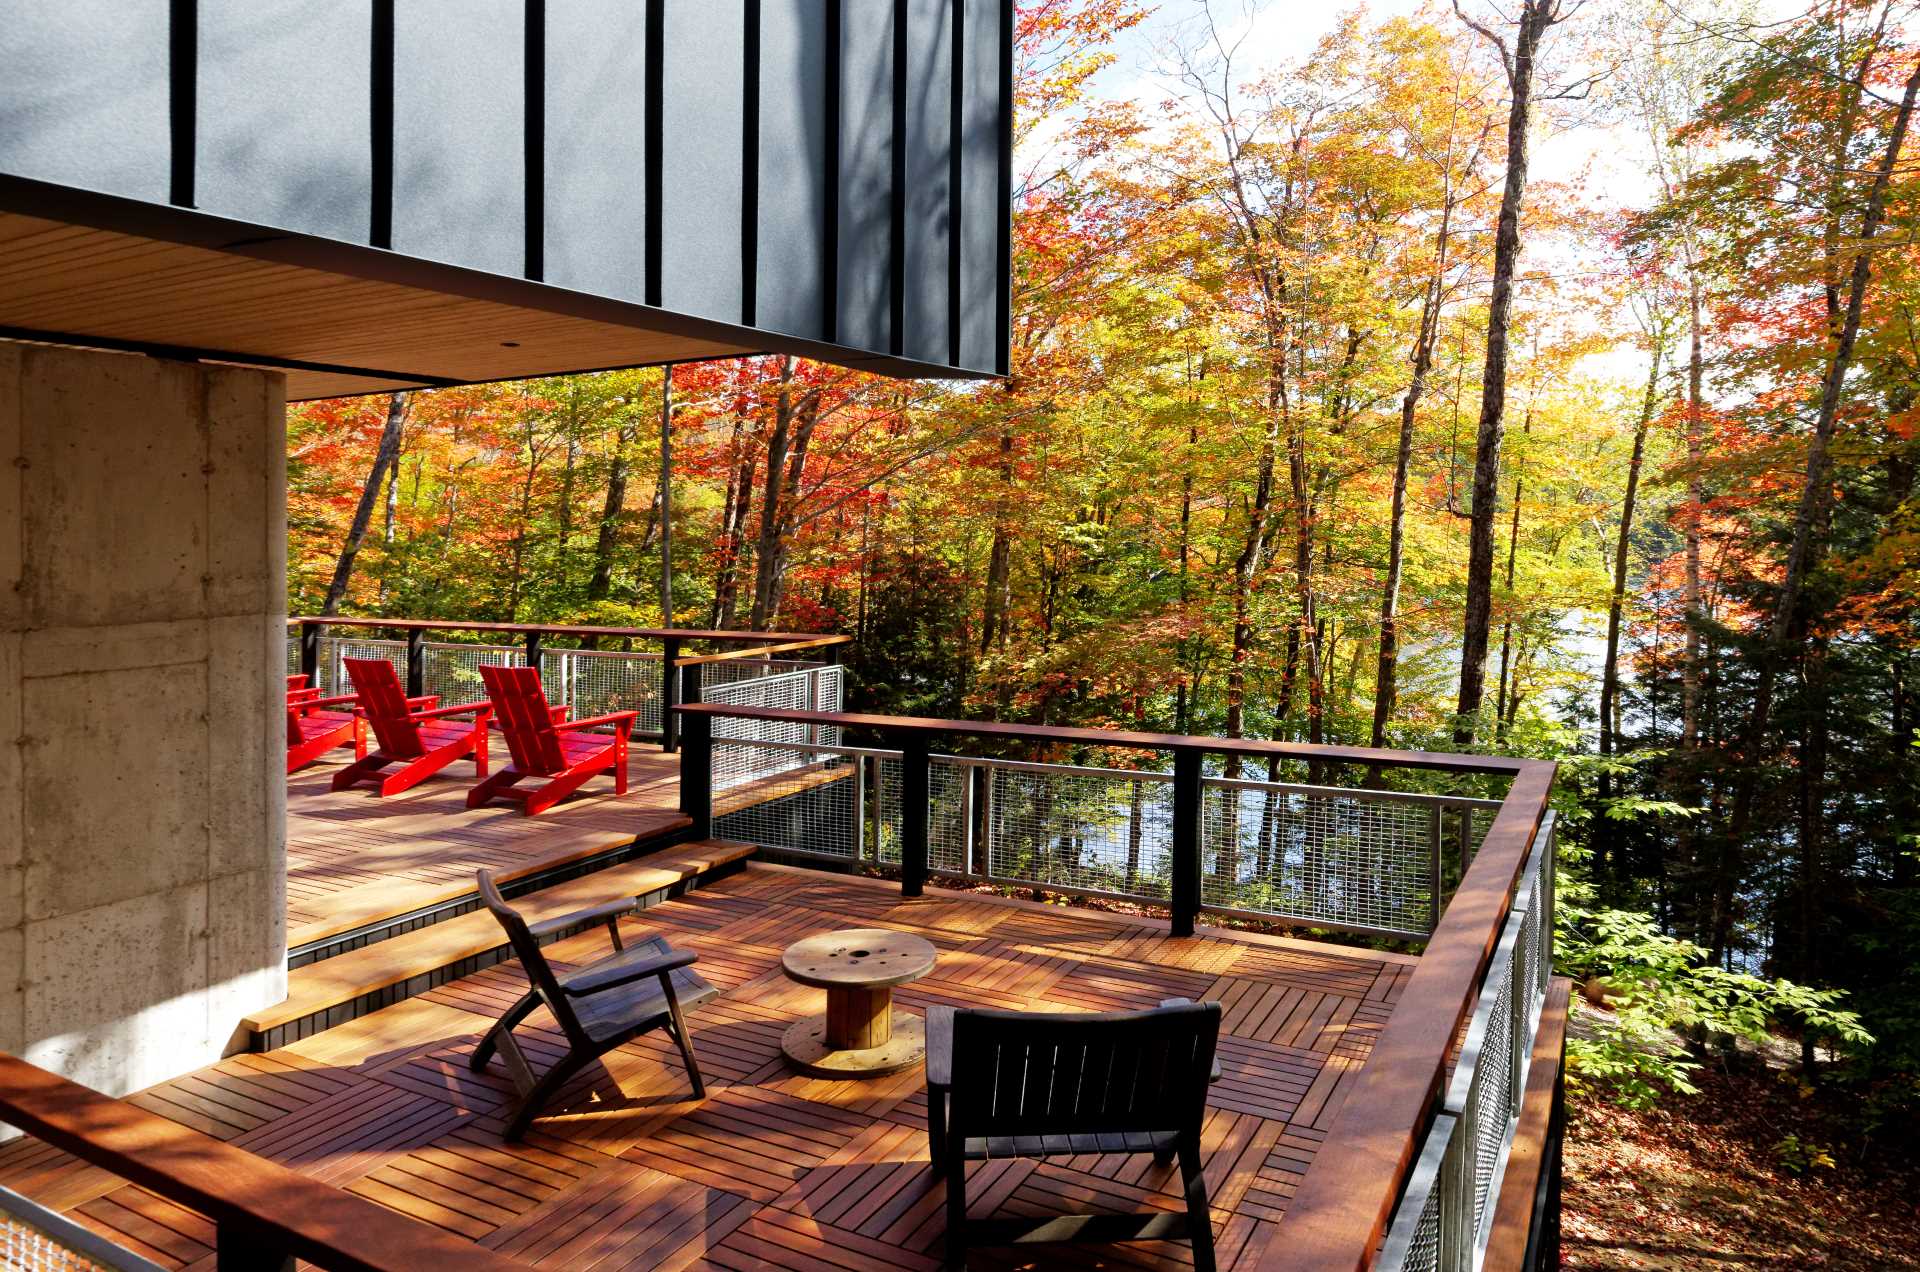 A modern lakehouse with outdoor spaces that extend the living areas.